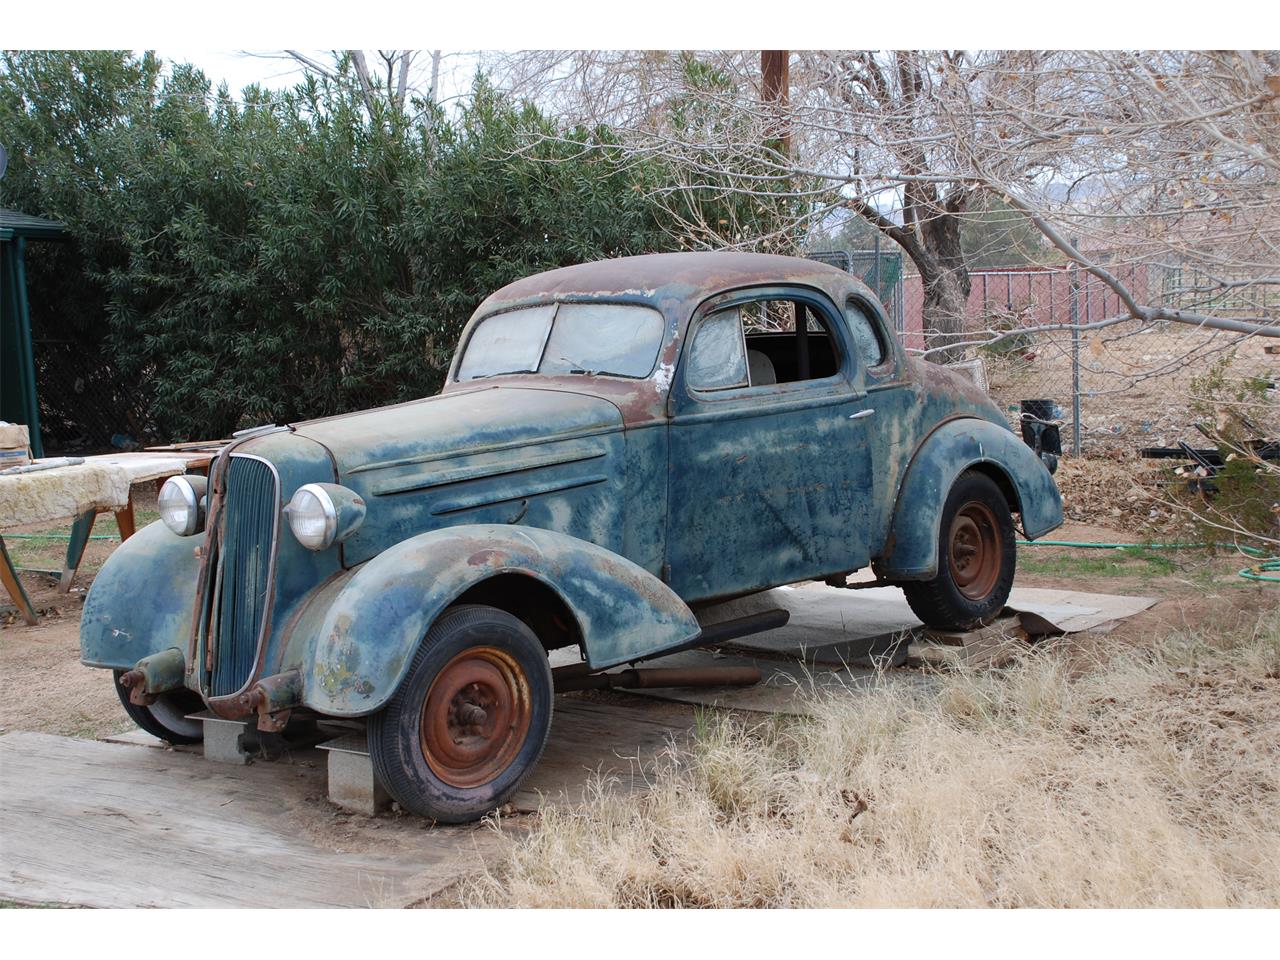 1936 Chevrolet Business Coupe in Apple Valley, California